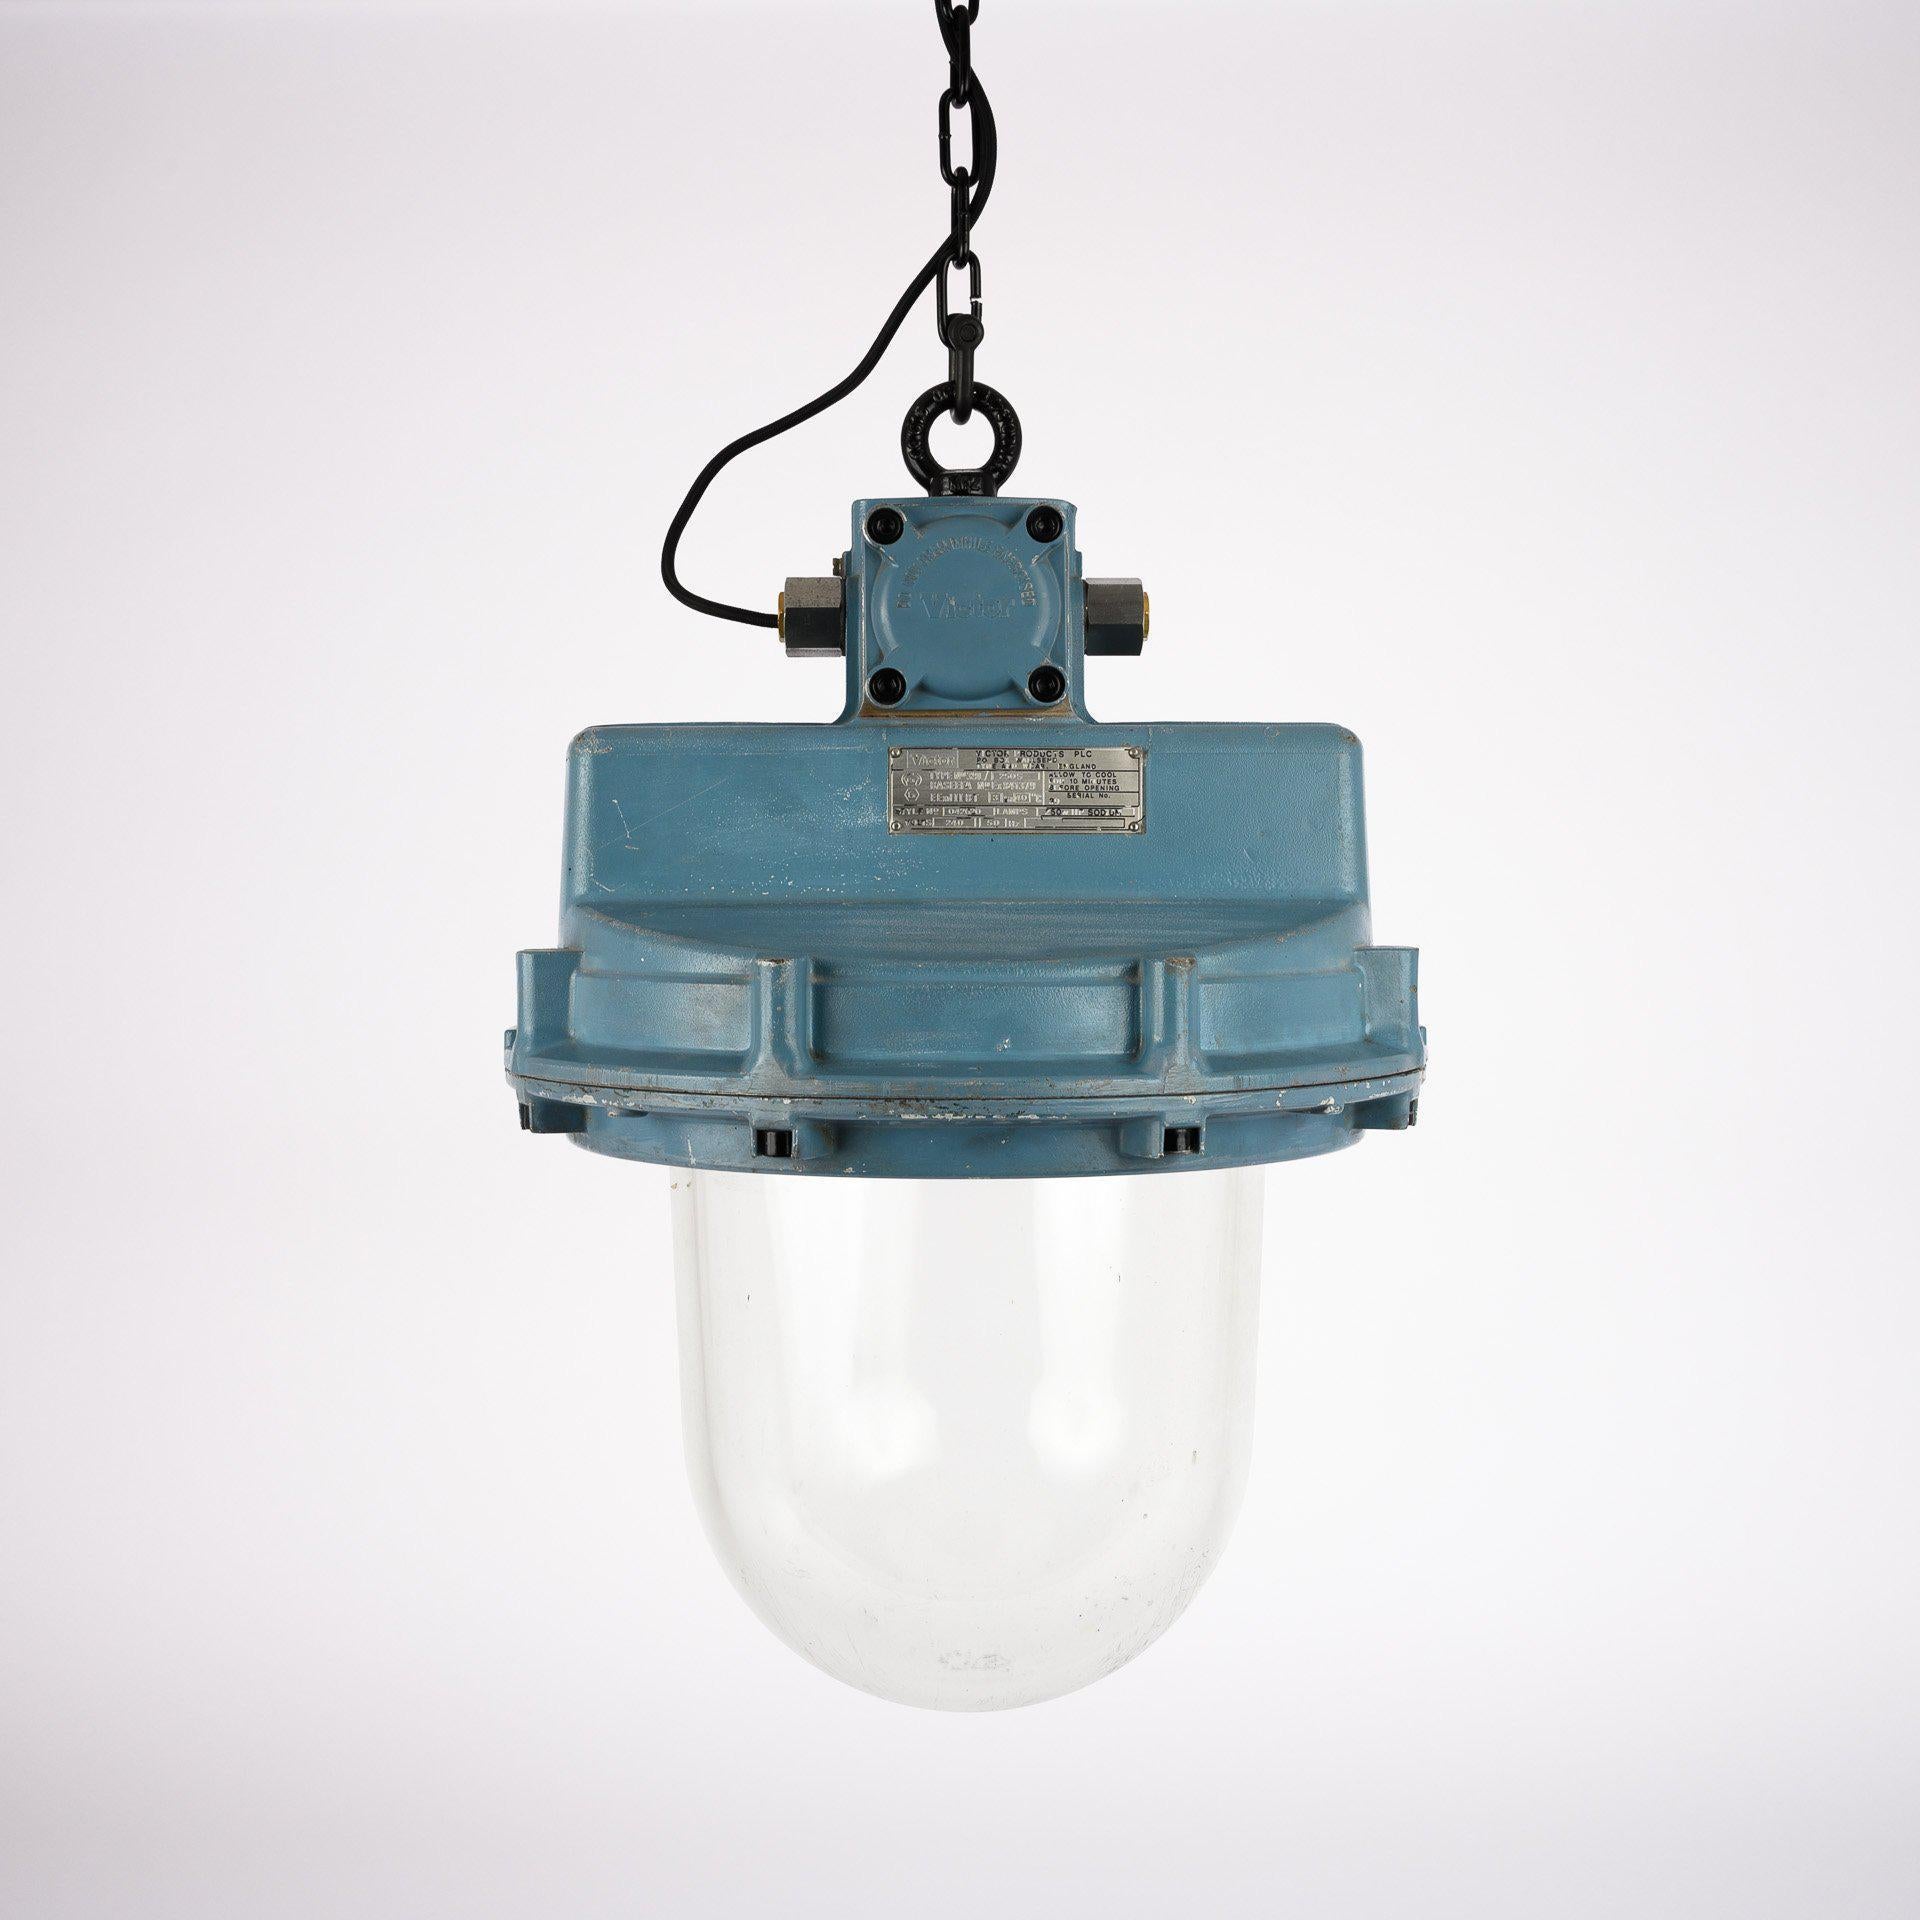 A huge run of 50 reclaimed extra large explosion proof industrial lights recovered as part of a large lot of lighting from a chemical mixing plant in Scotland.

These oversized light pendants were originally designed for extreme condition and